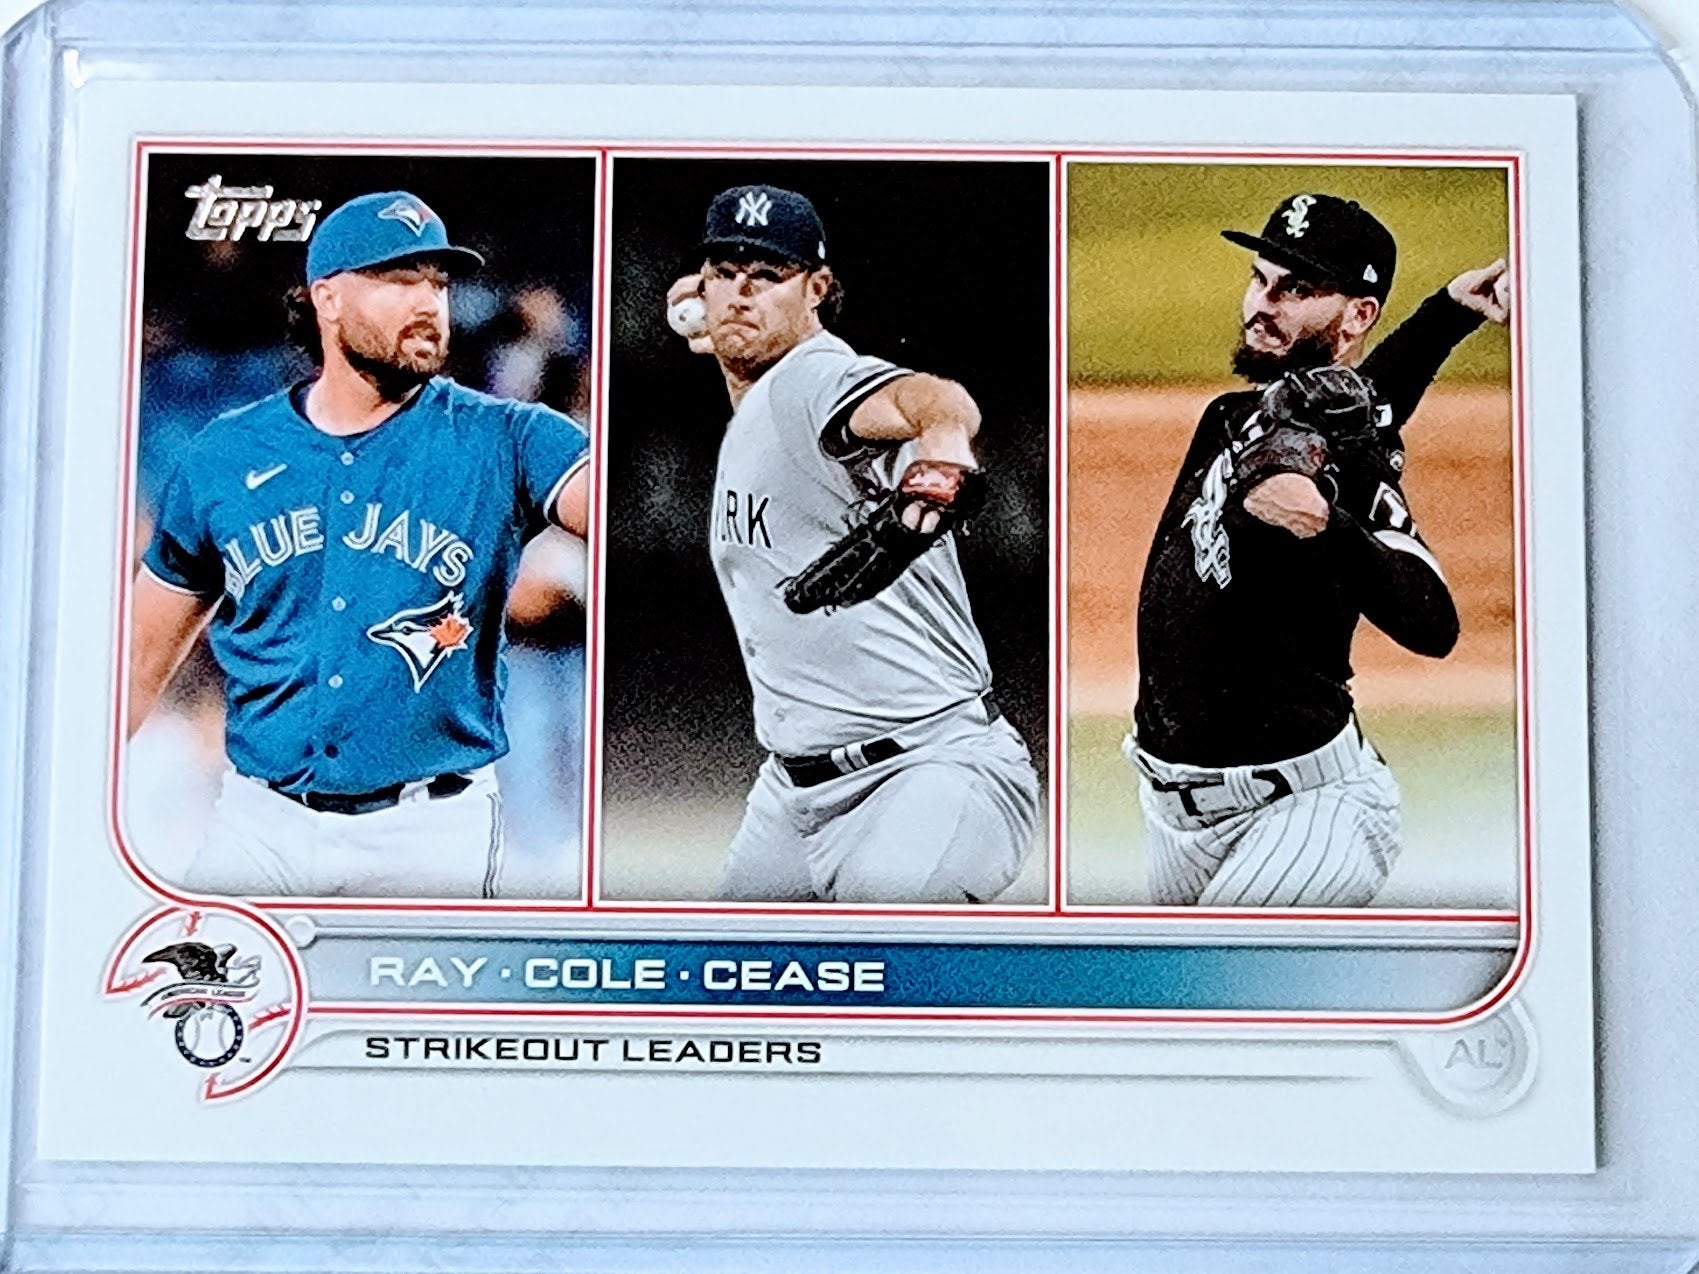 2022 Topps Strikeout Leaders Ray, Cole & Cease Baseball Trading Card GRB1 simple Xclusive Collectibles   